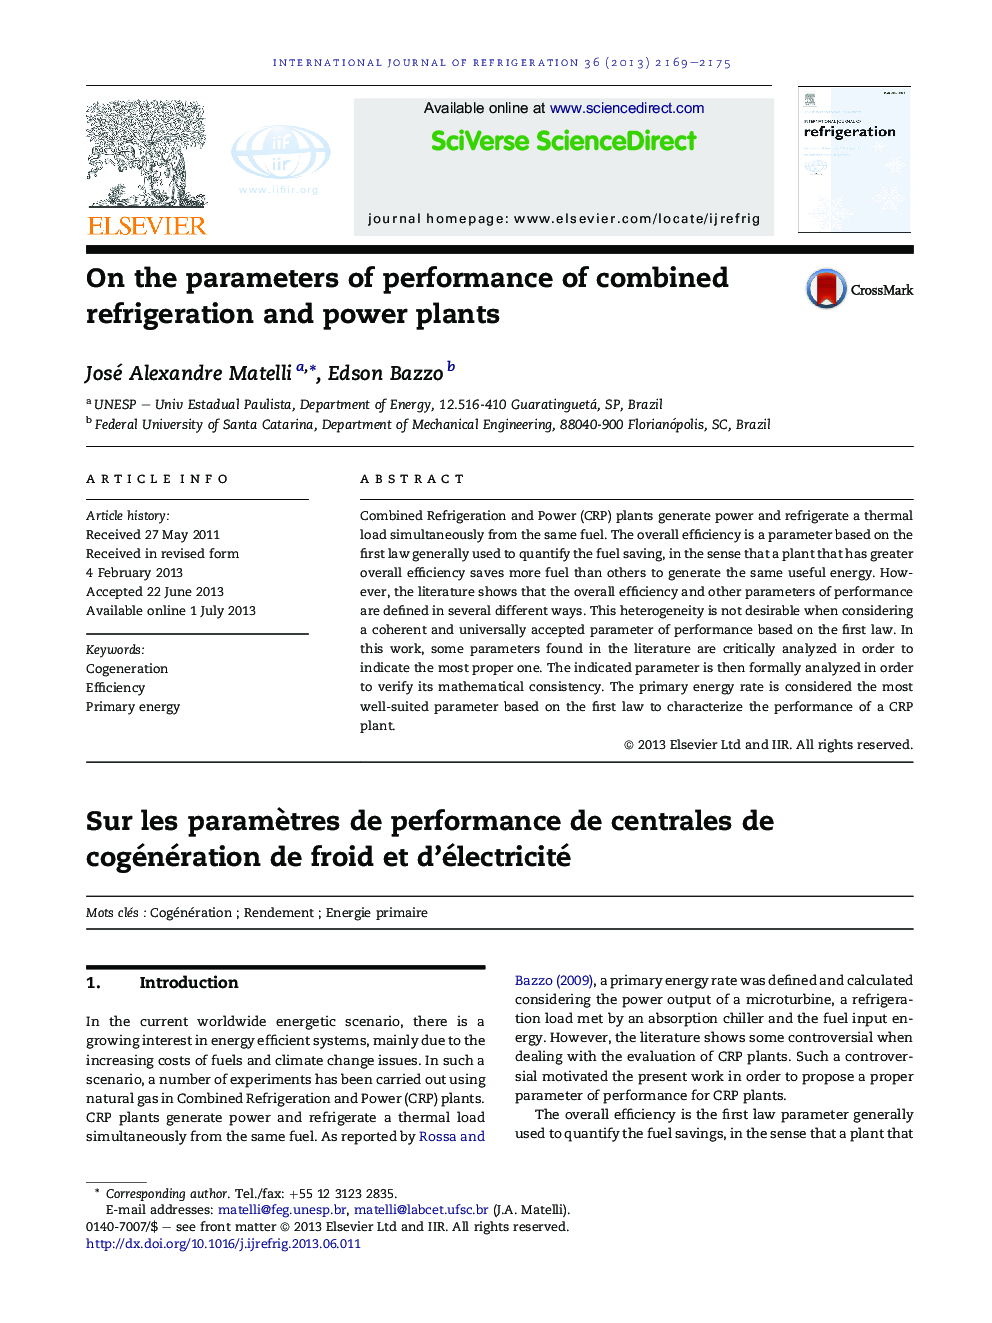 On the parameters of performance of combined refrigeration and power plants